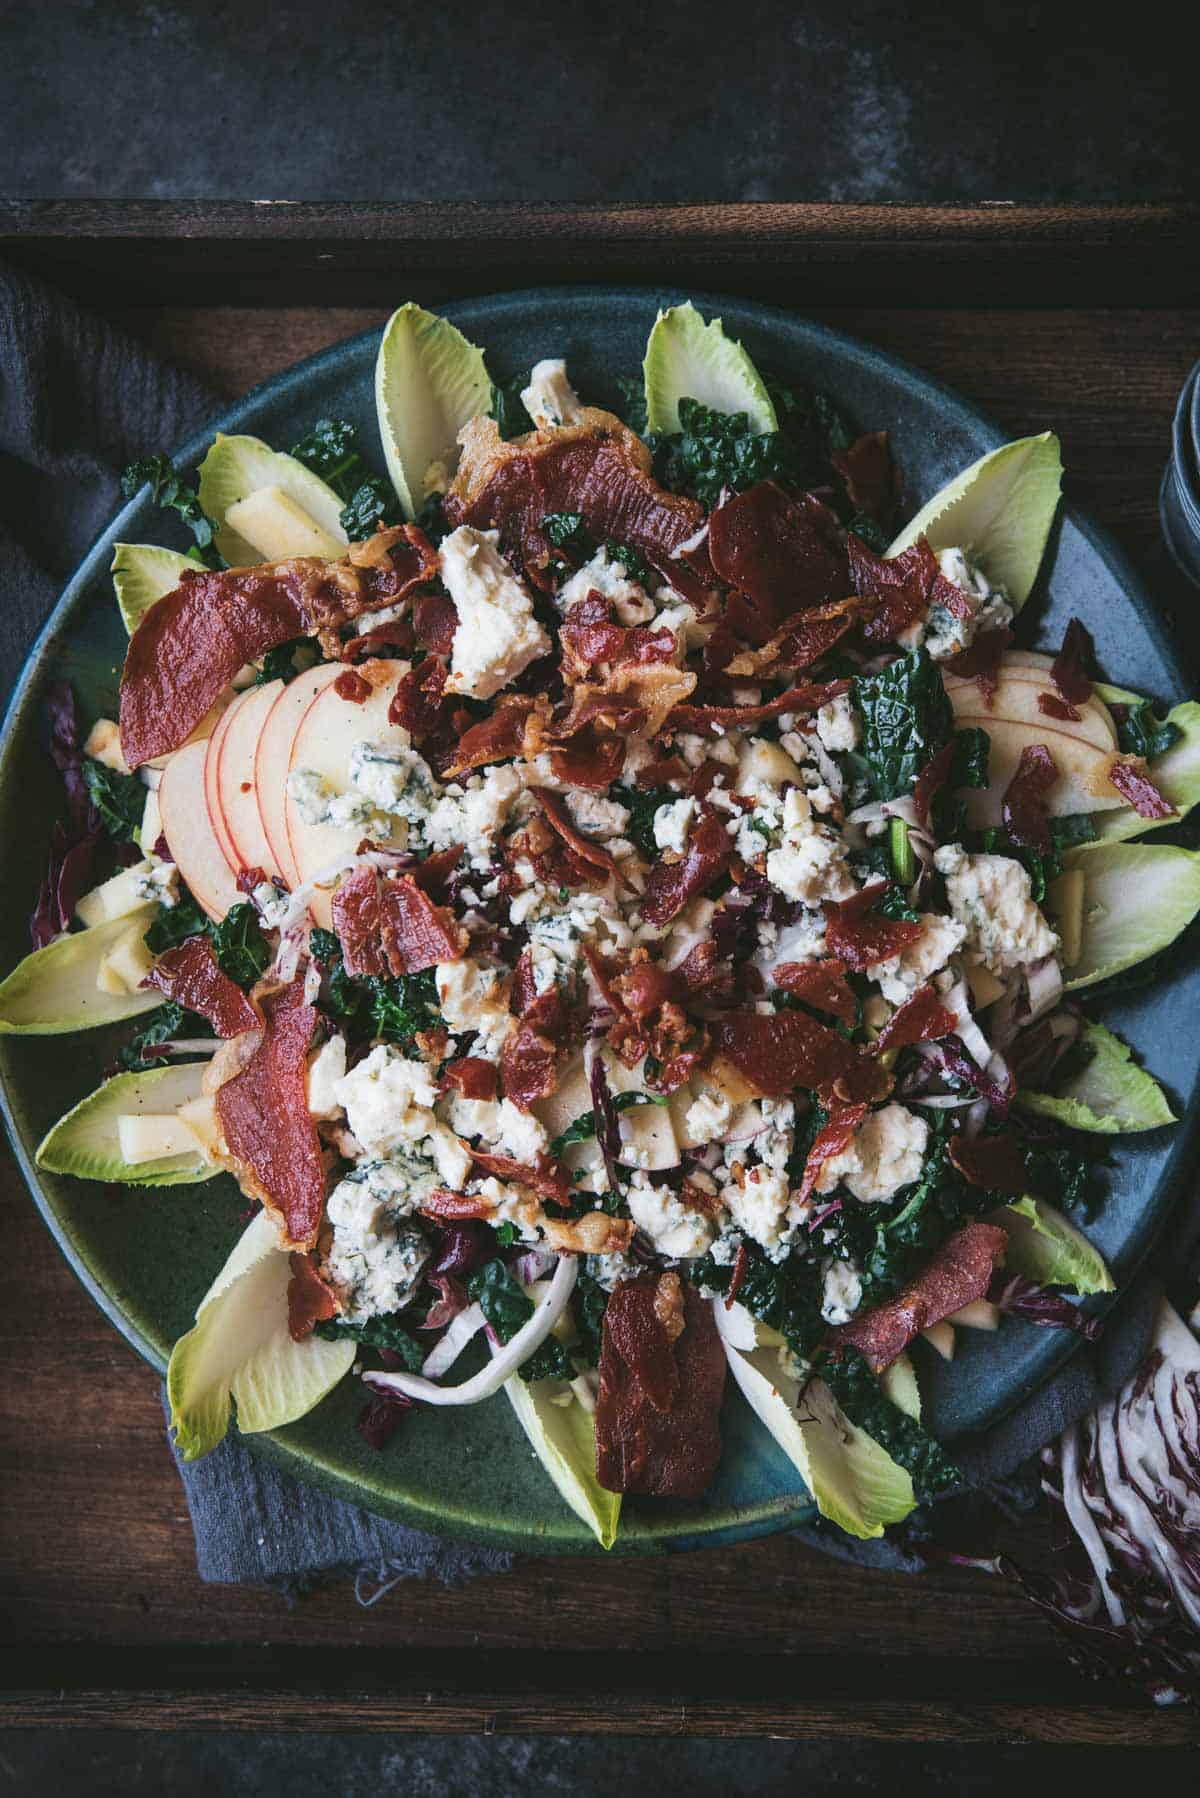 overhead close up of endive radicchio salad with kale, apples, gorgonzola crumbles and crispy prosciutto on top.  All the ingredients are layered on a green and blue platter inside of a wooden serving tray.